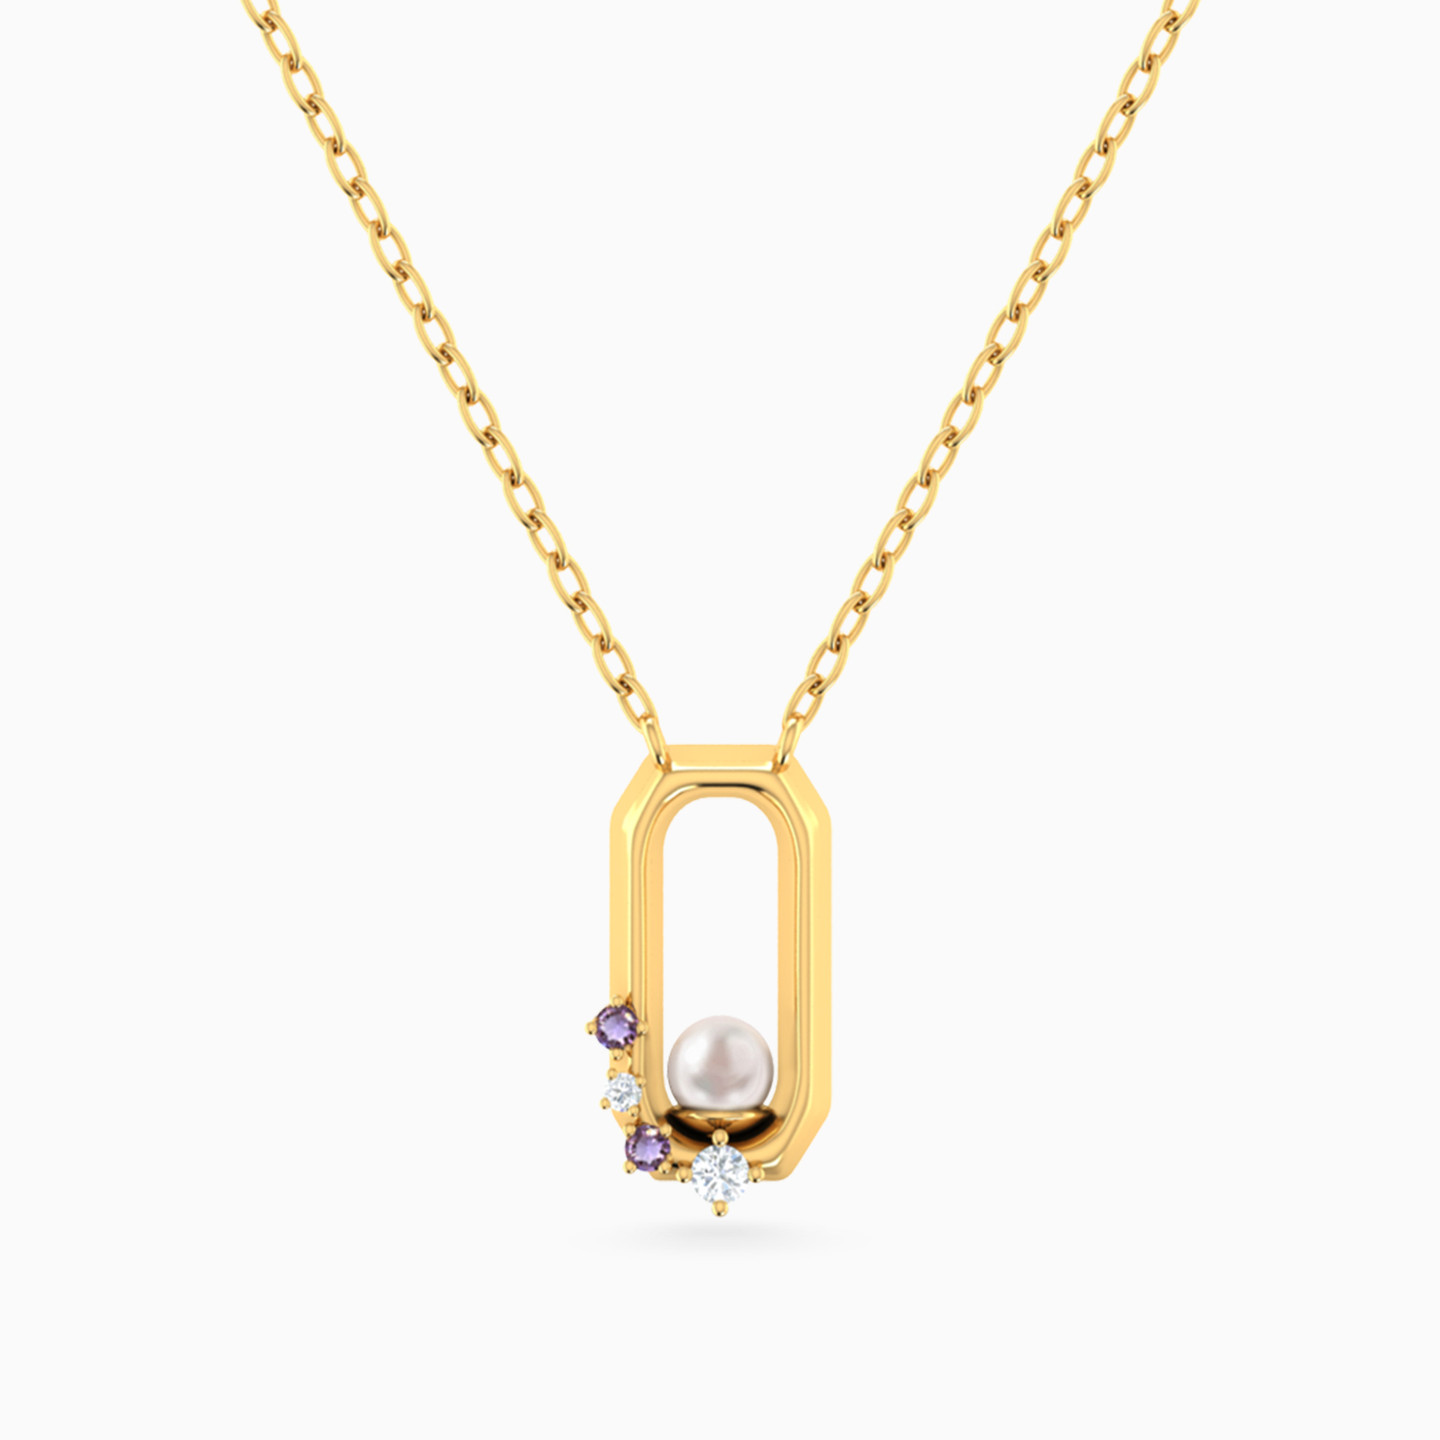 Rectangle Shaped Pearls & Colored Stones Pendant with 18K Gold Chain